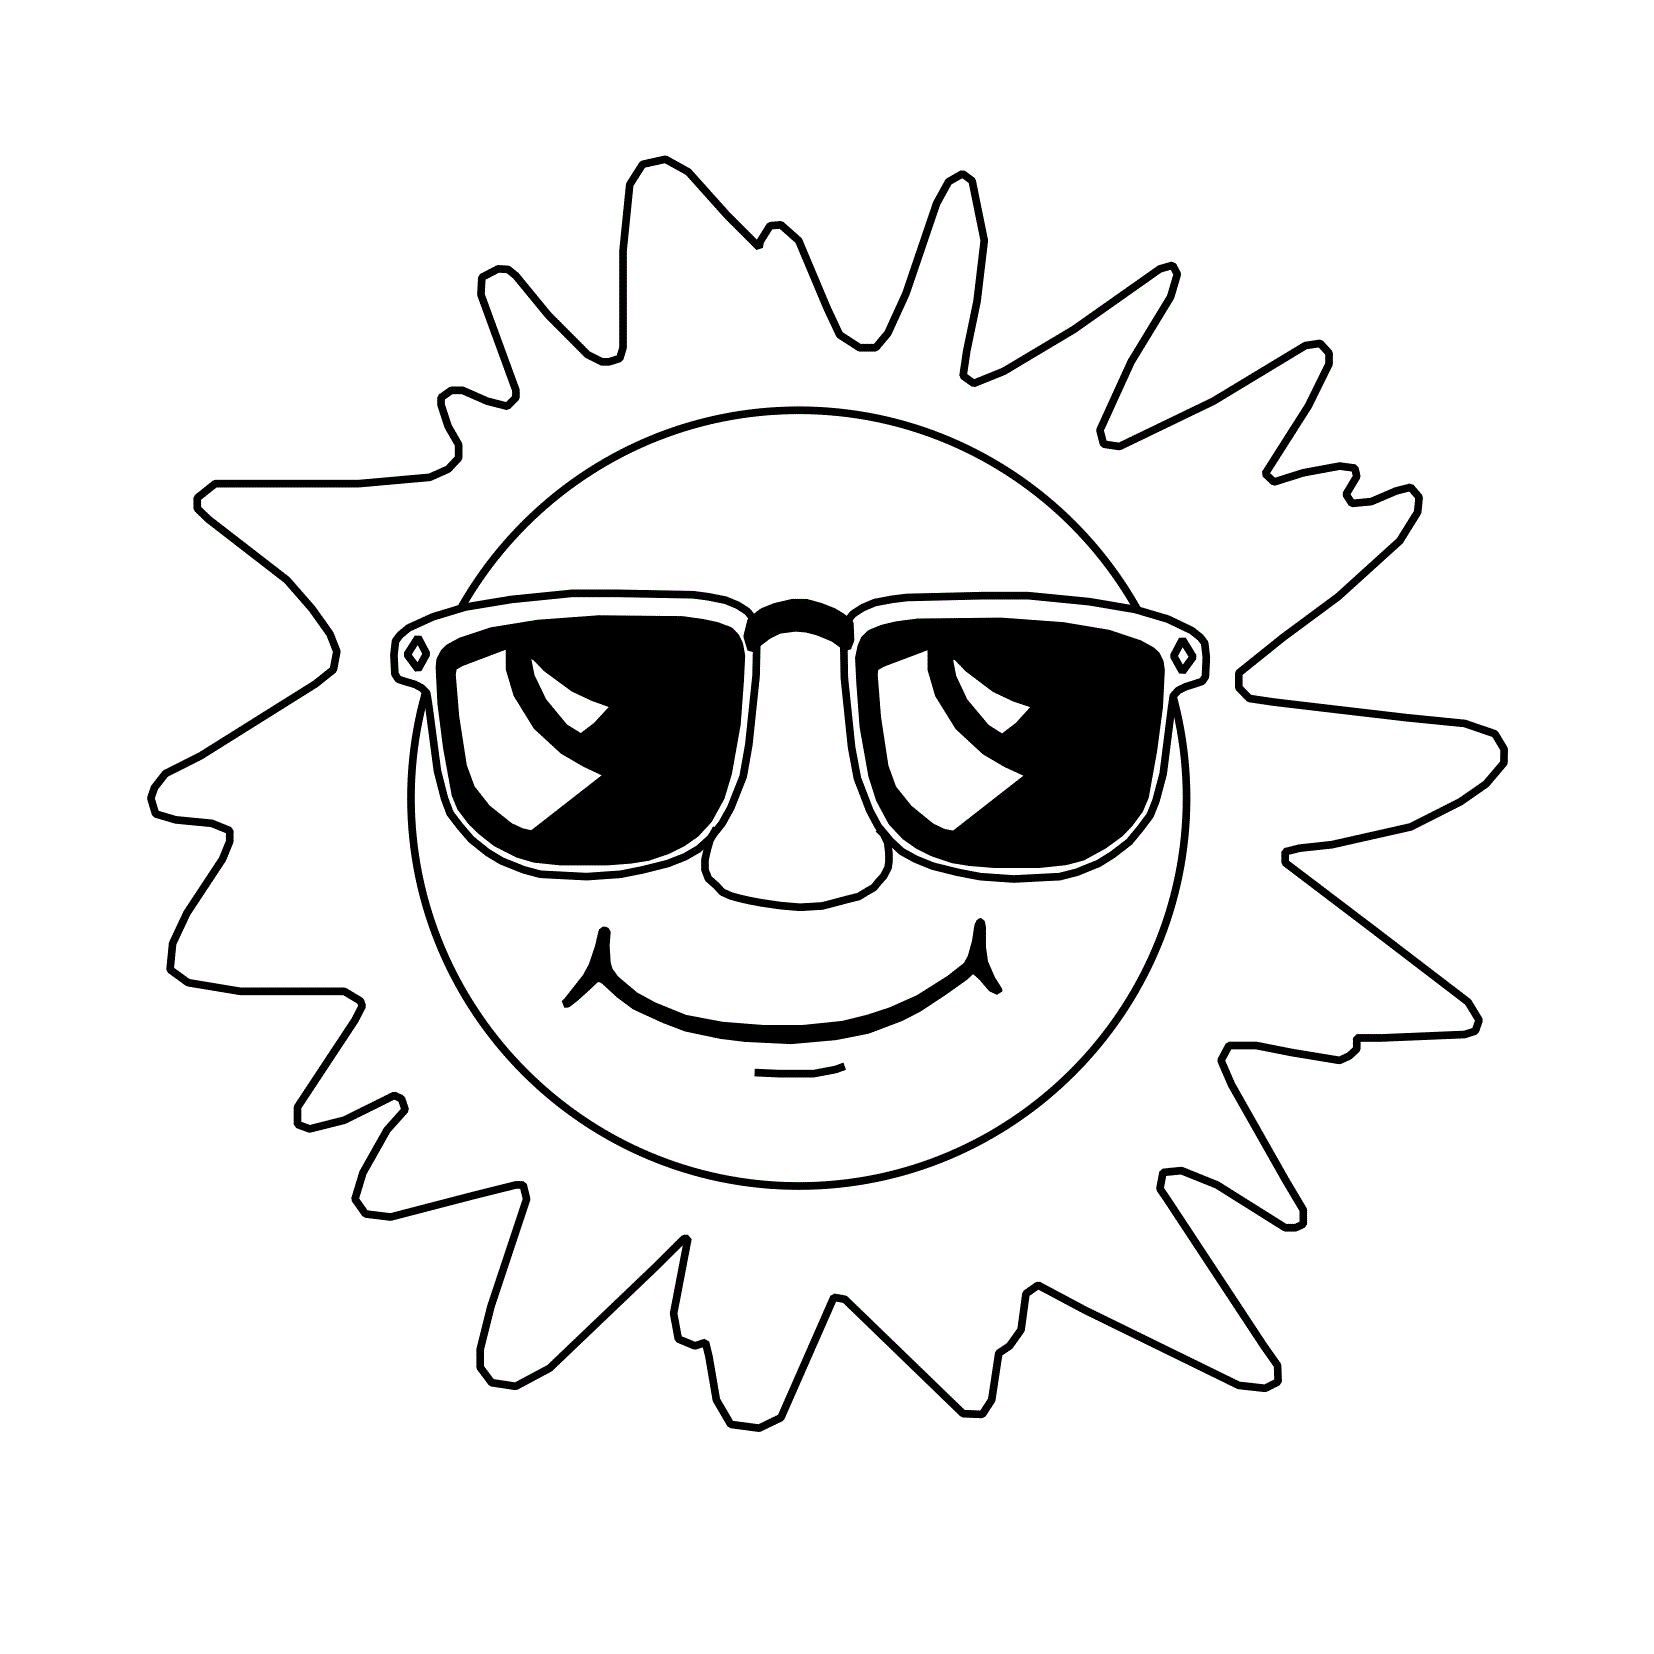 printable sun coloring pages